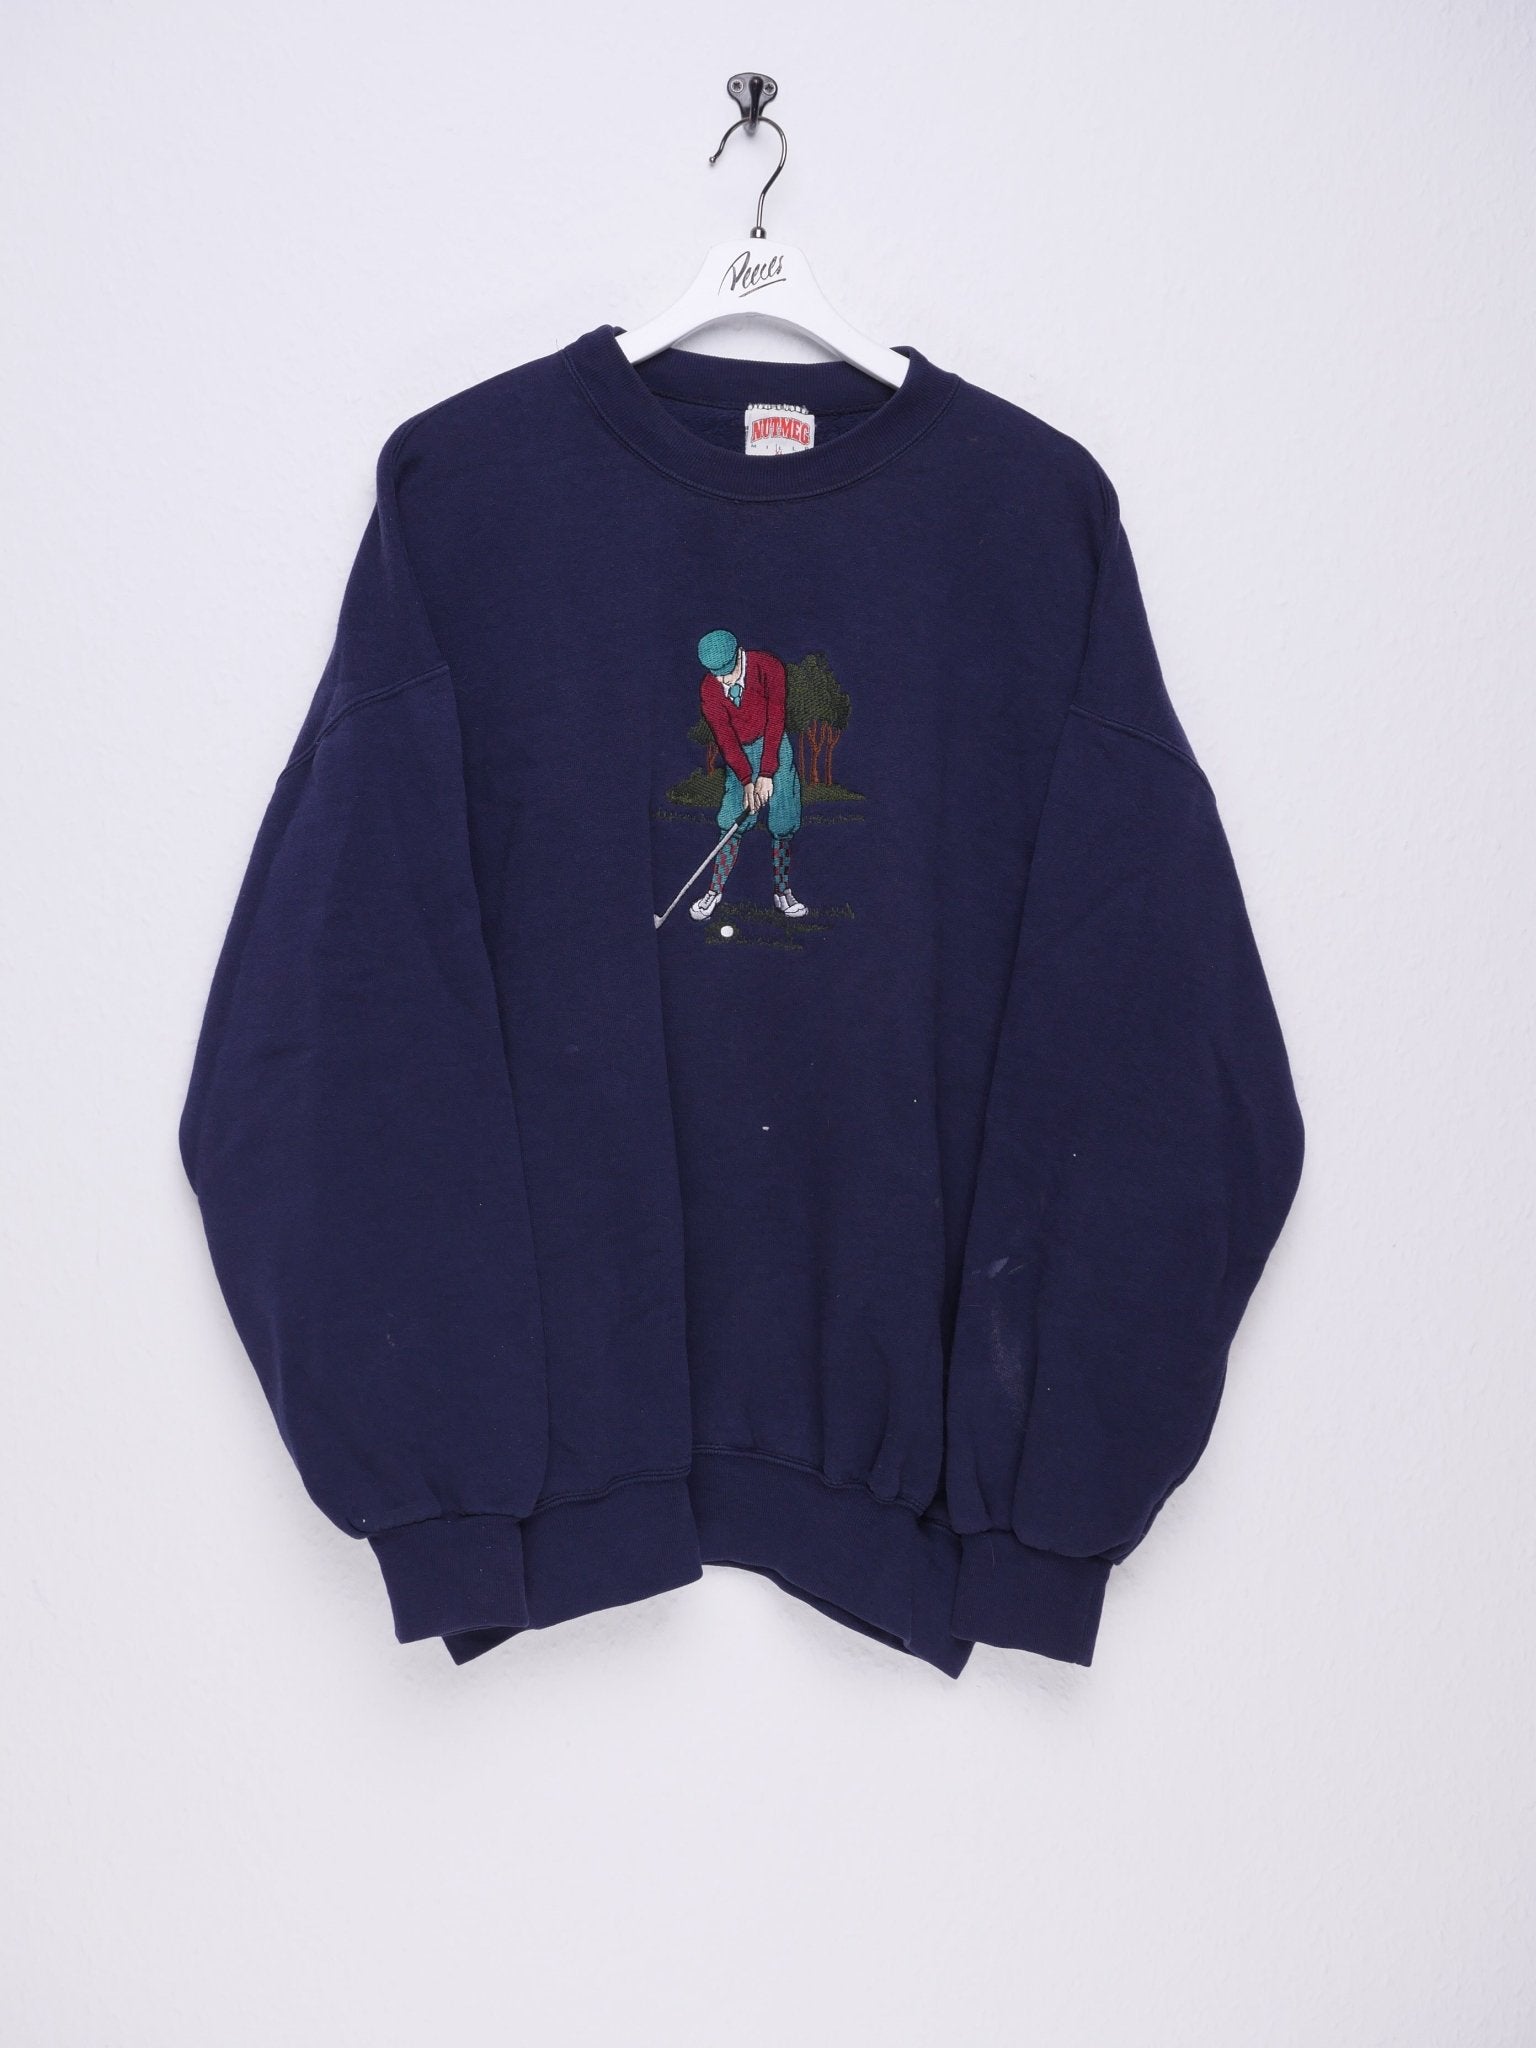 Golfer embroidered Logo Vintage navy Sweater - Peeces